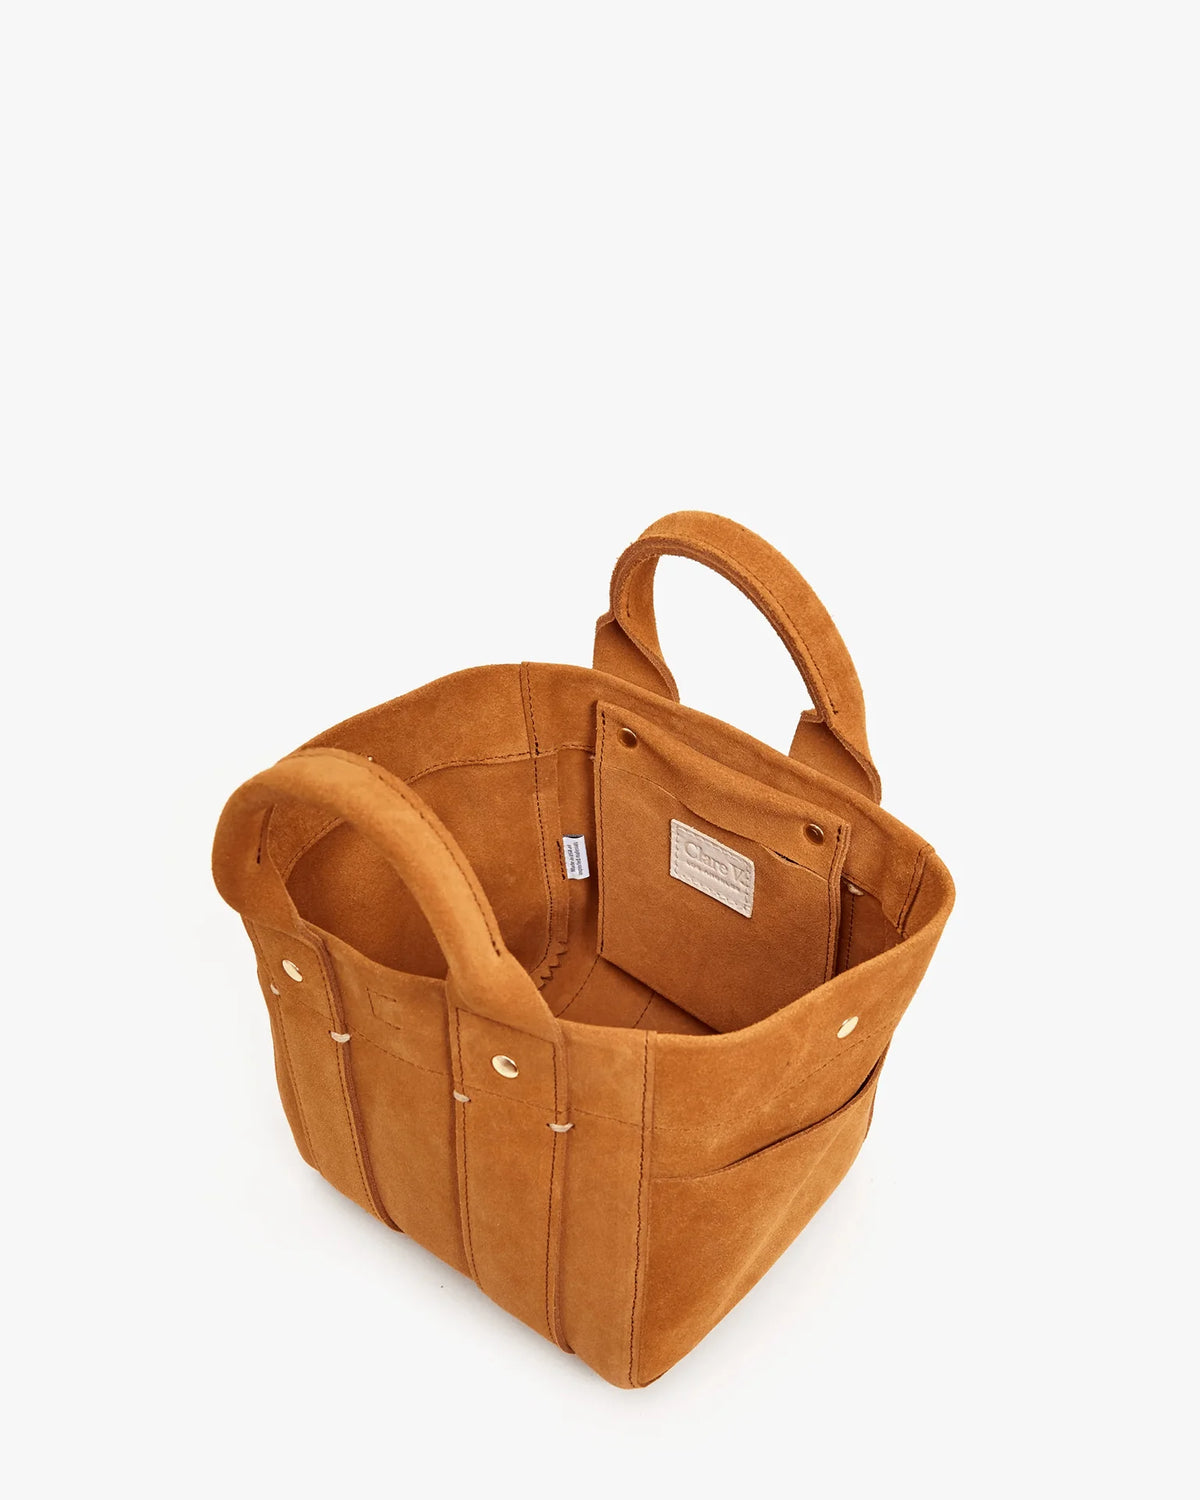 Clare V Le Petit Box Tote in Suede Camel